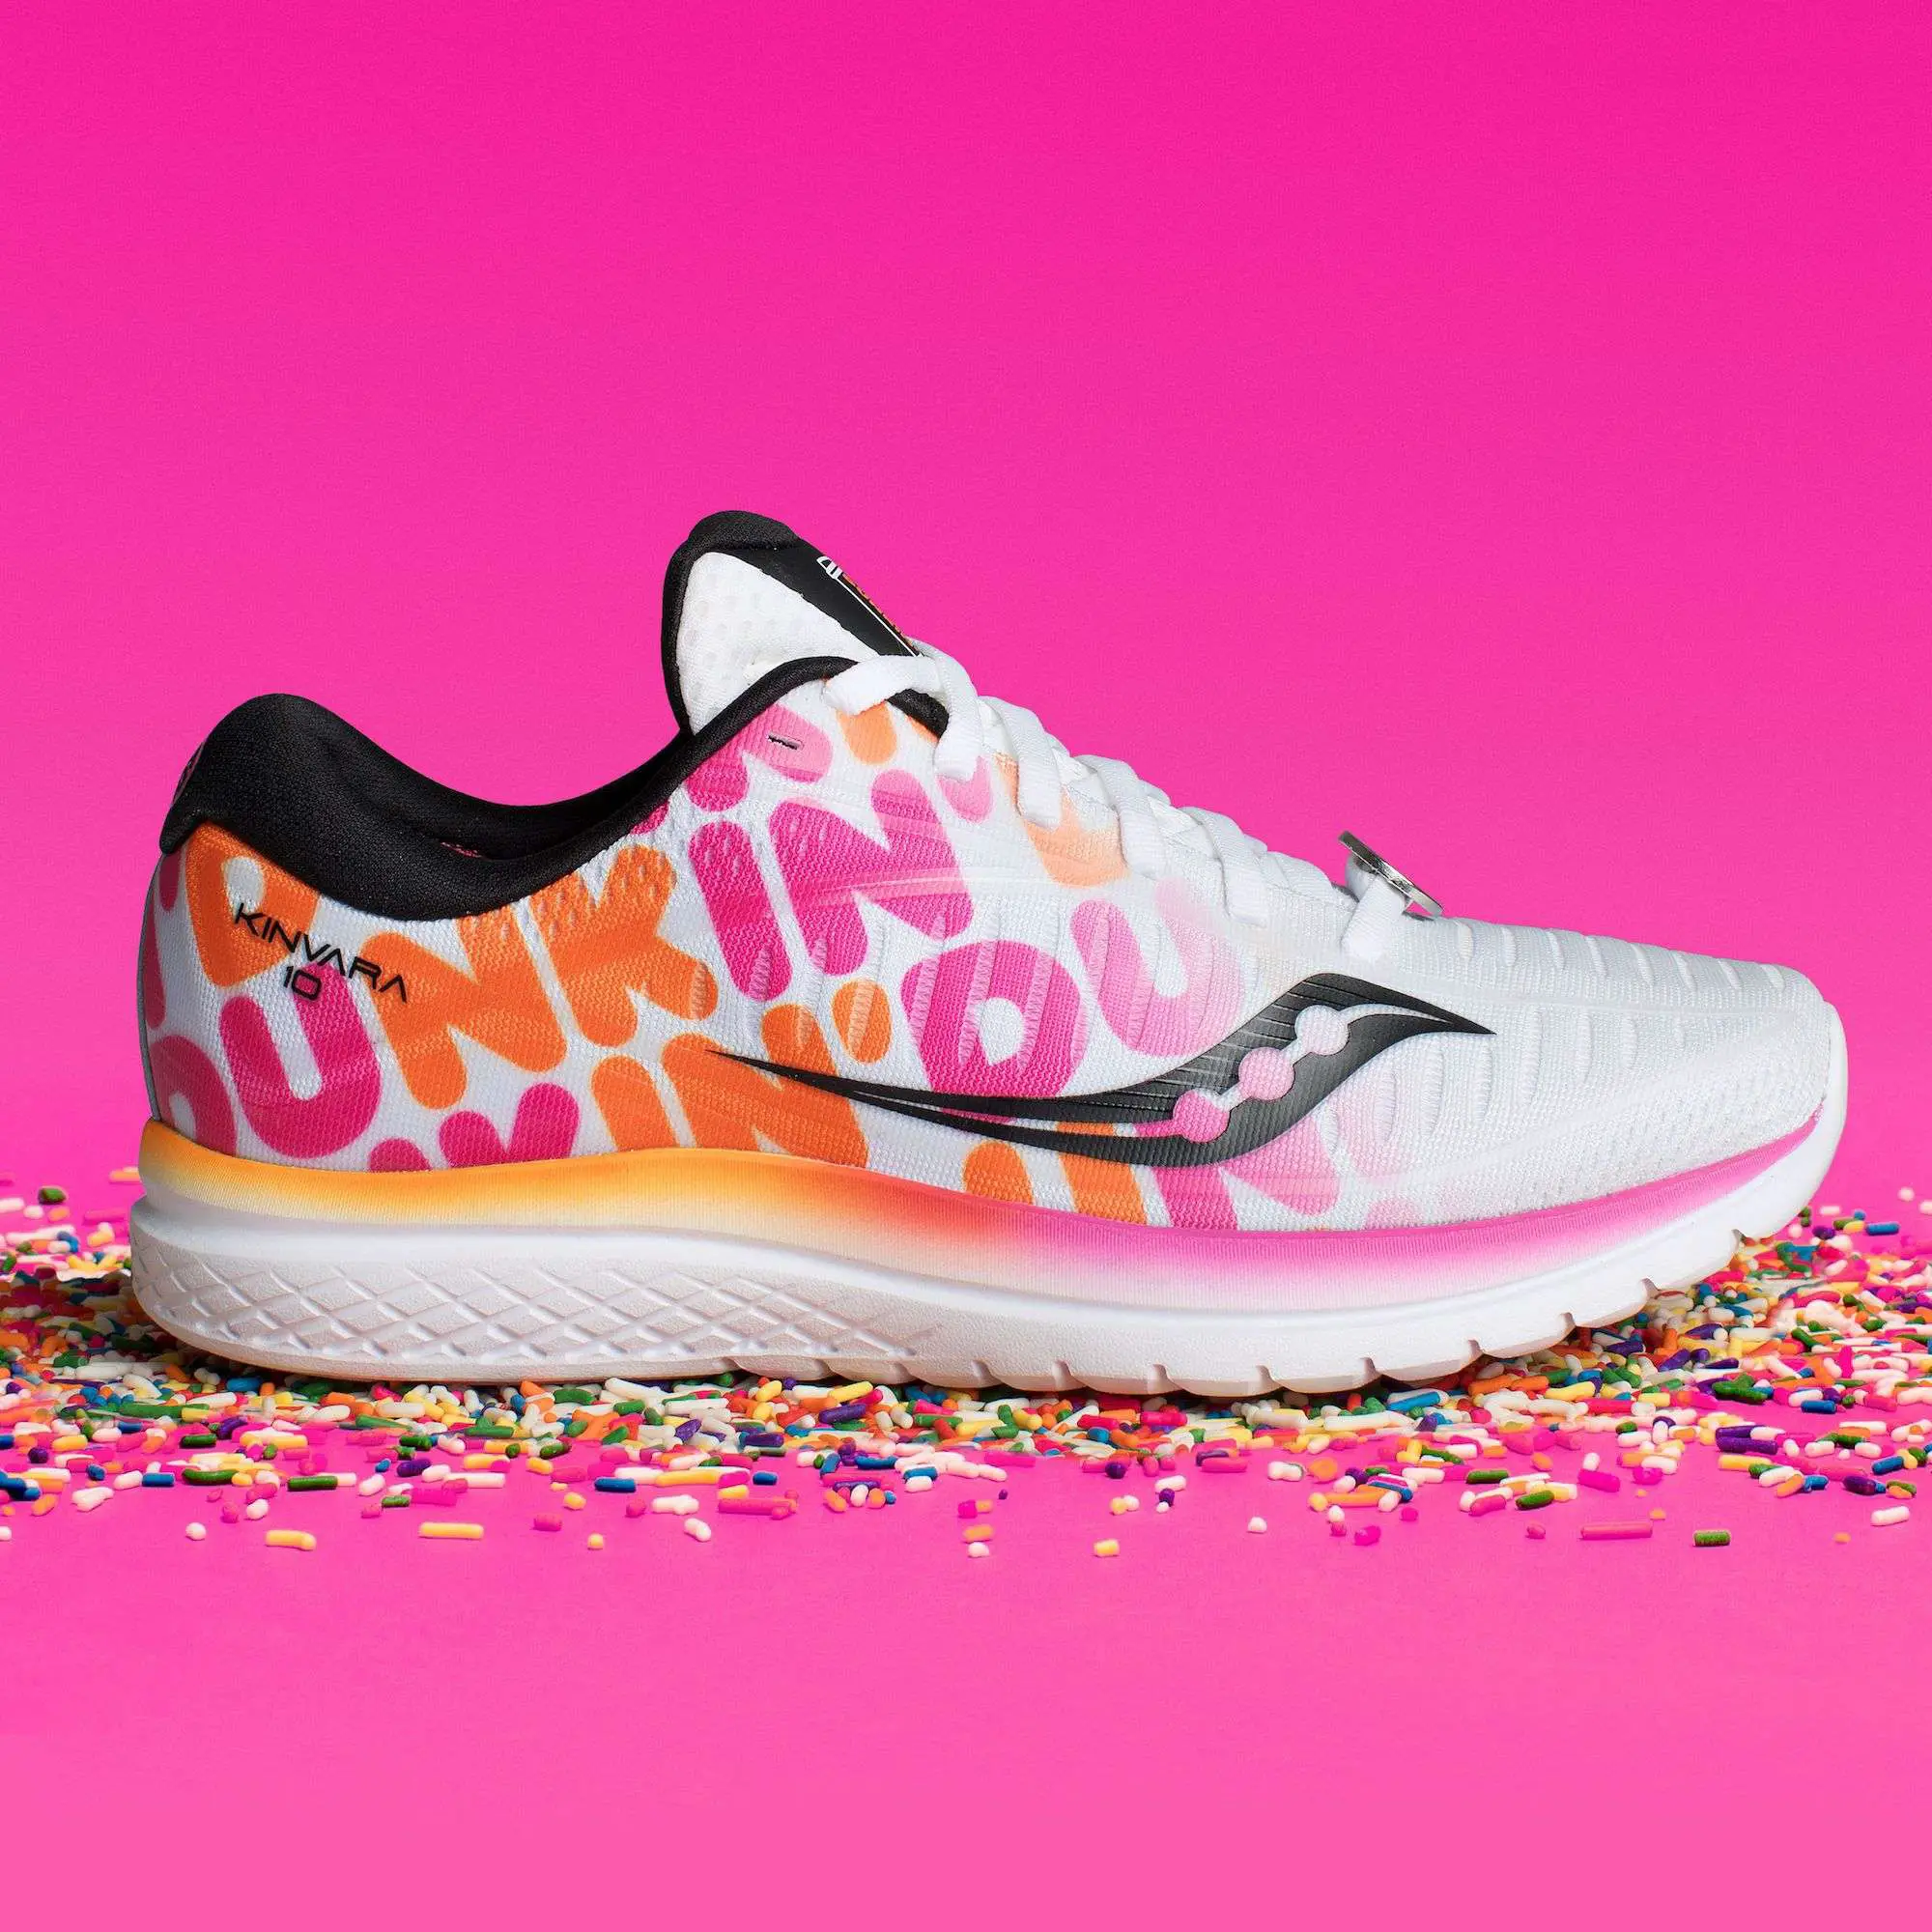 Saucony And Dunkin Made A Running Shoe: Saucony x Dunkin ...